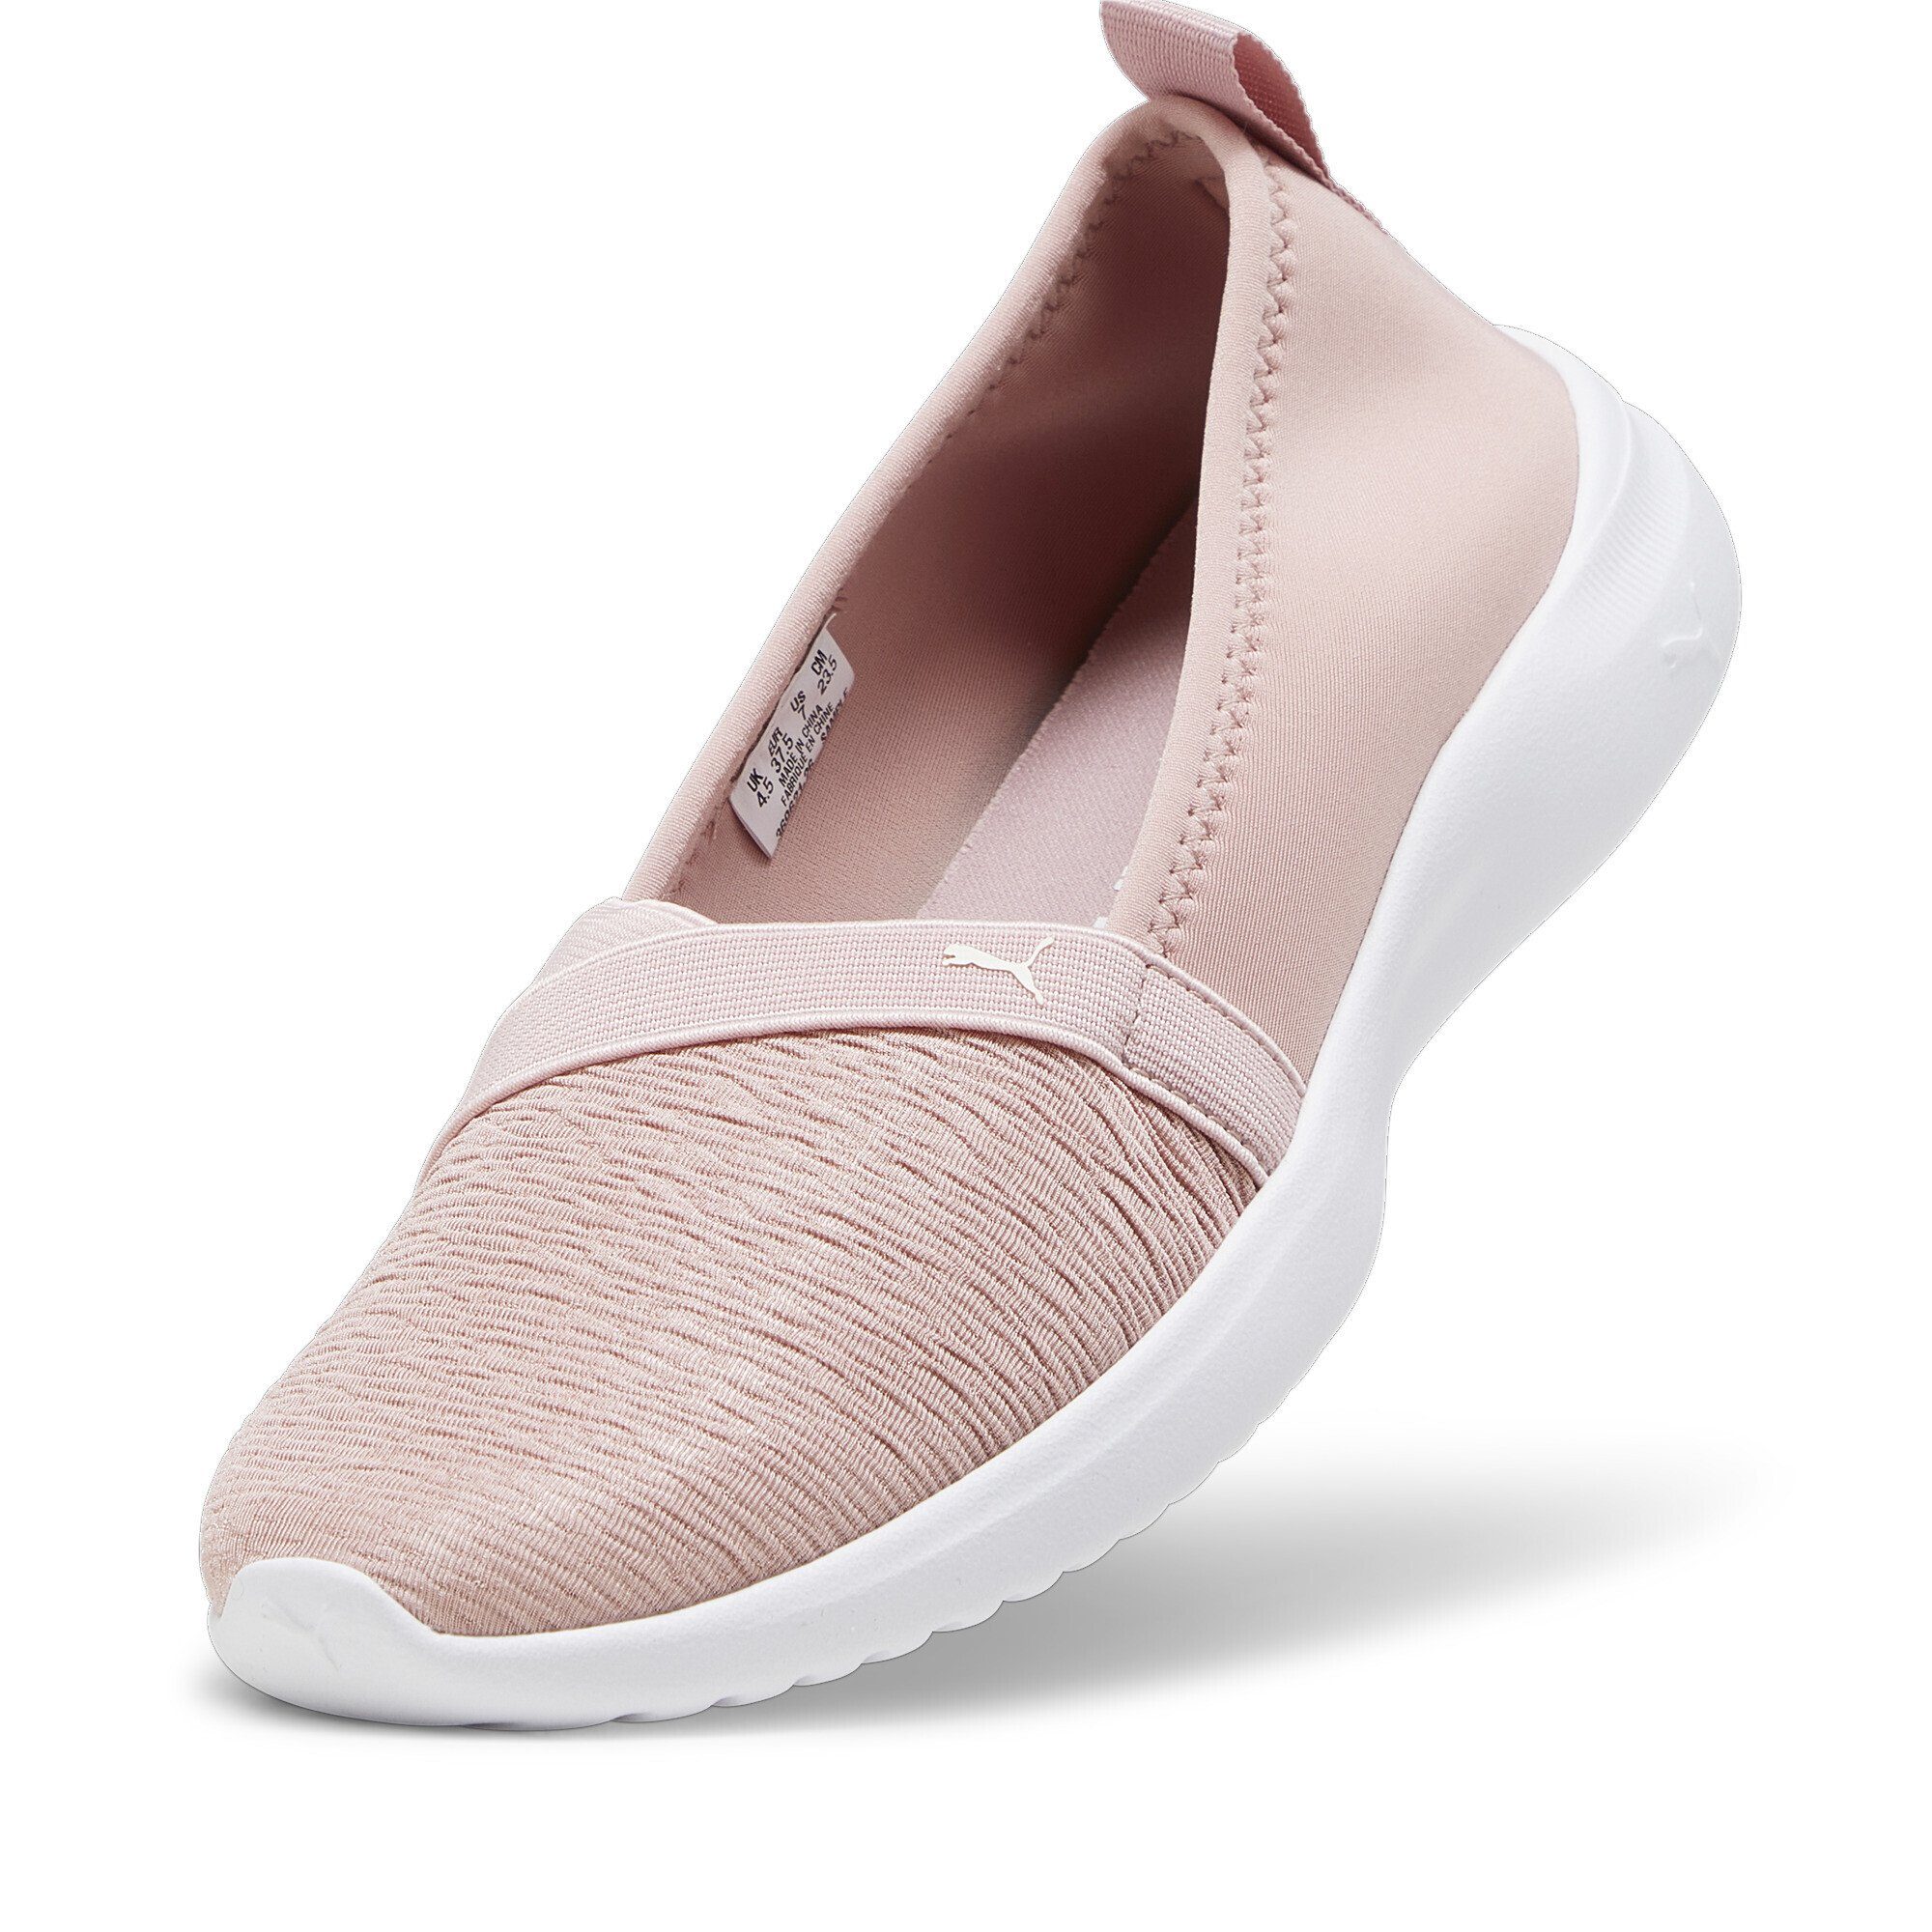 PUMA Adelina Sneakers White Pink Ivory Future Damen Frosted Trainingsschuh